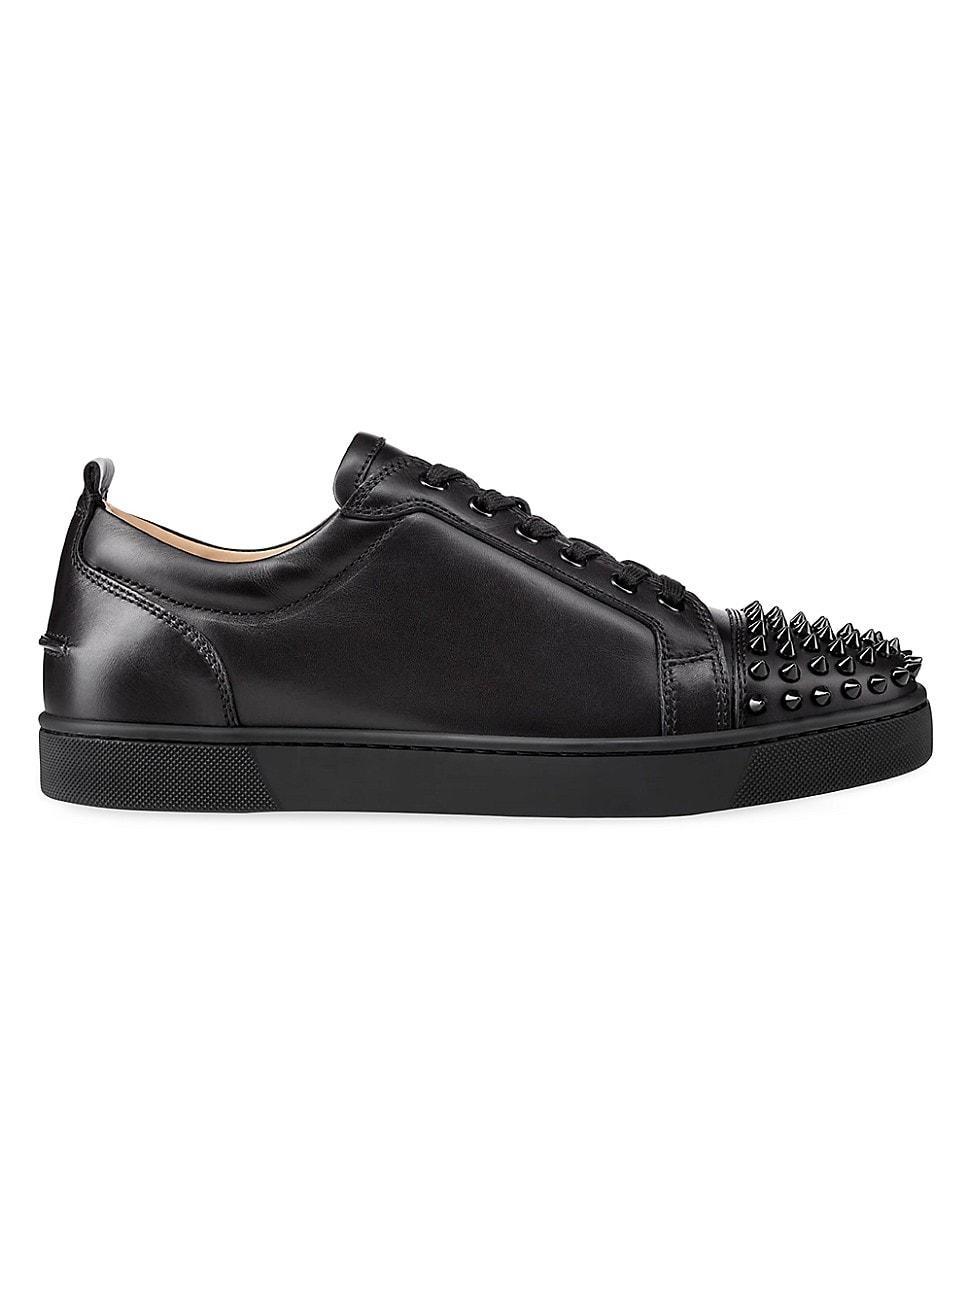 Christian Louboutin Louis Junior Spikes Sneaker Product Image